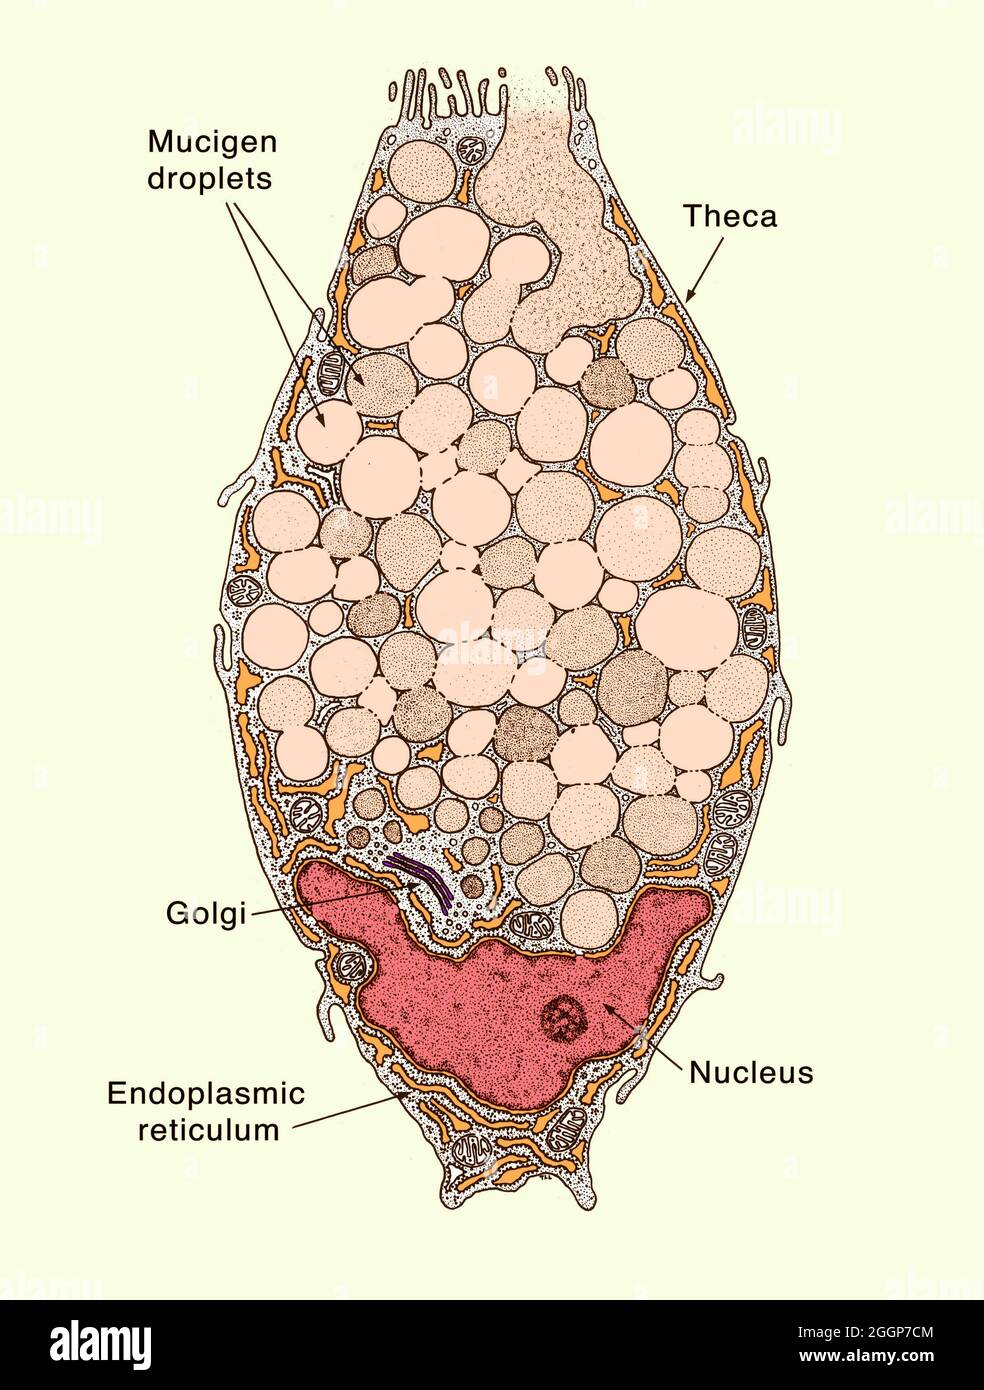 Colorized diagram of an intestinal goblet cell, with mucigen droplets, theca, golgi, nucleus and endoplasmic reticulum labeled. Stock Photo